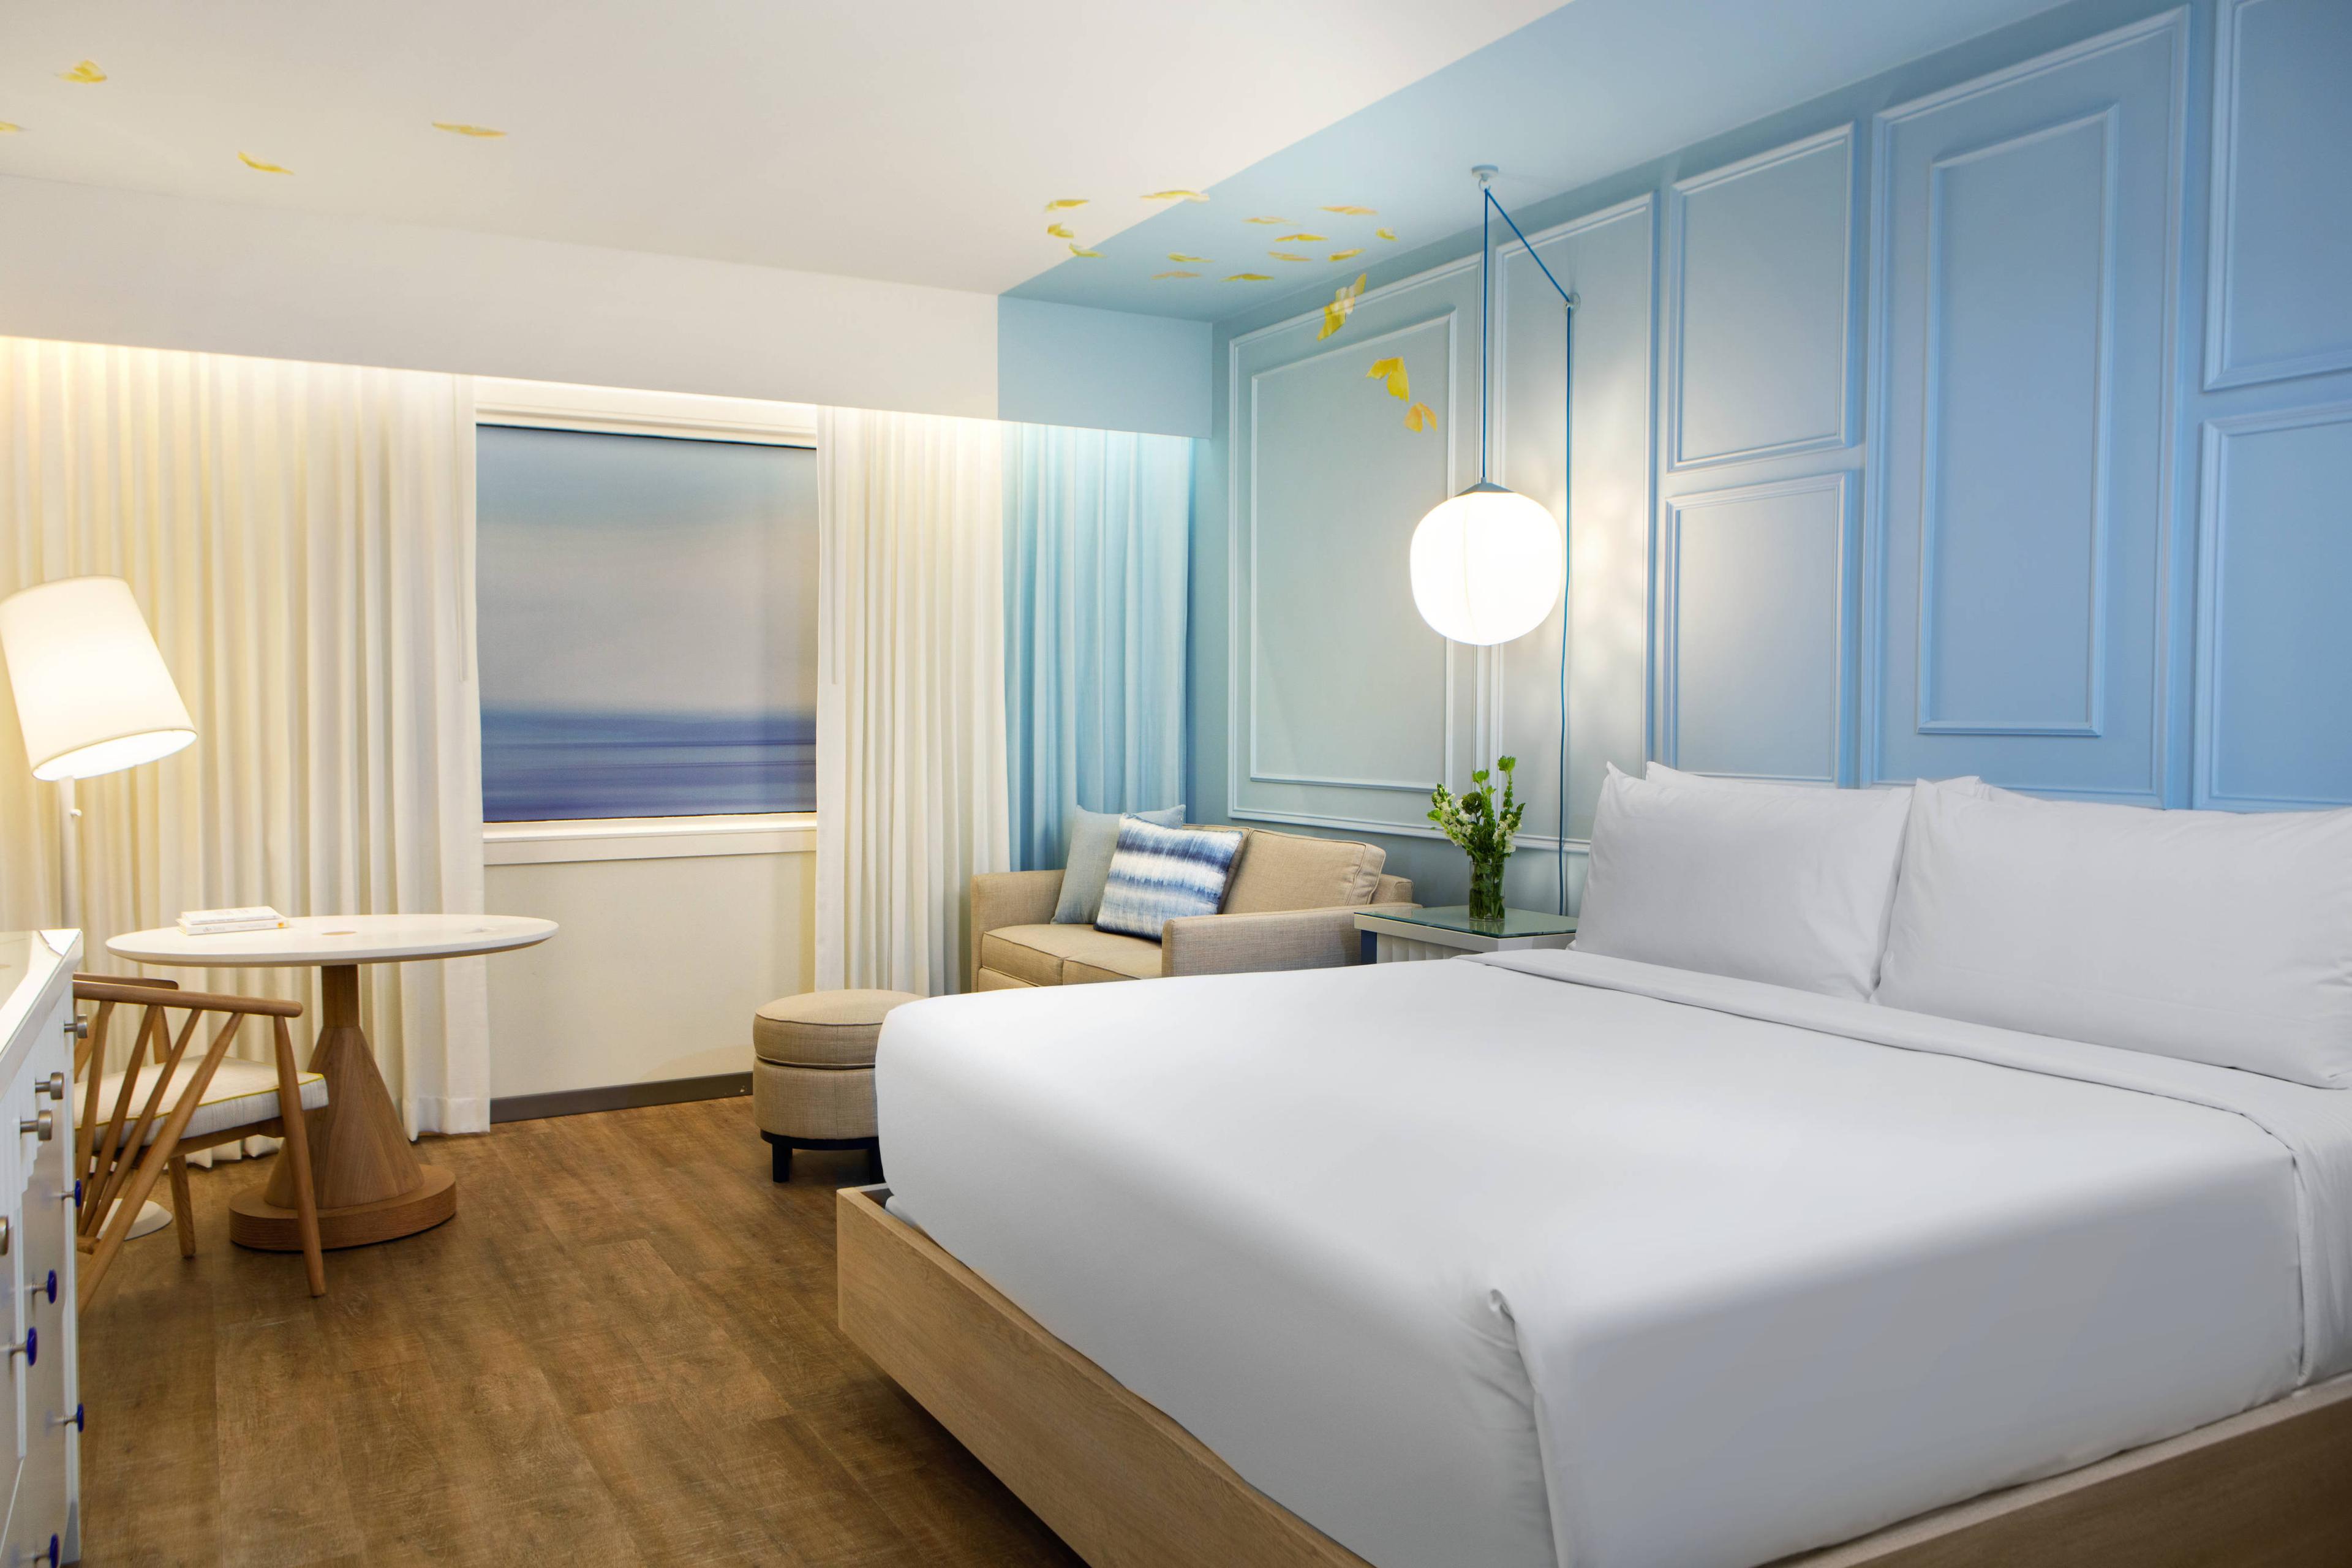 After exploring the area, get a good night's rest in our cozy, modern rooms.